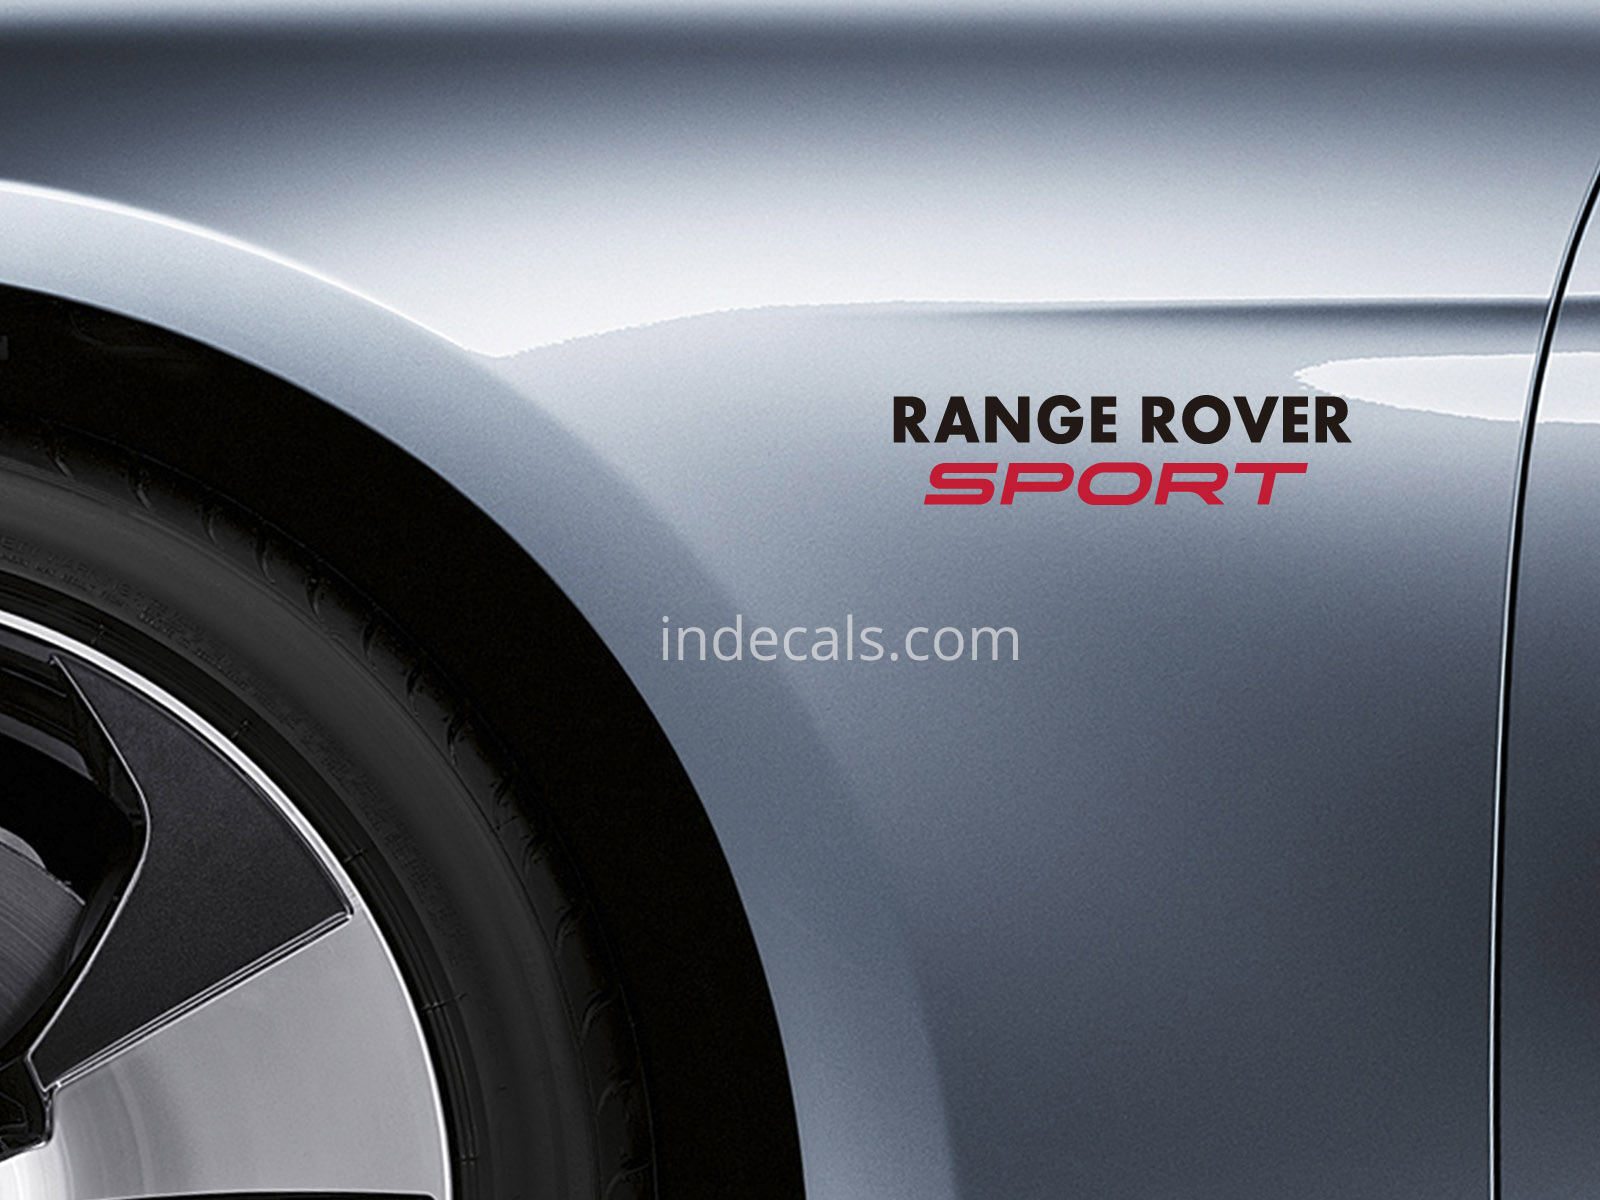 2 x Range Rover Sports stickers for Wings - Black & Red